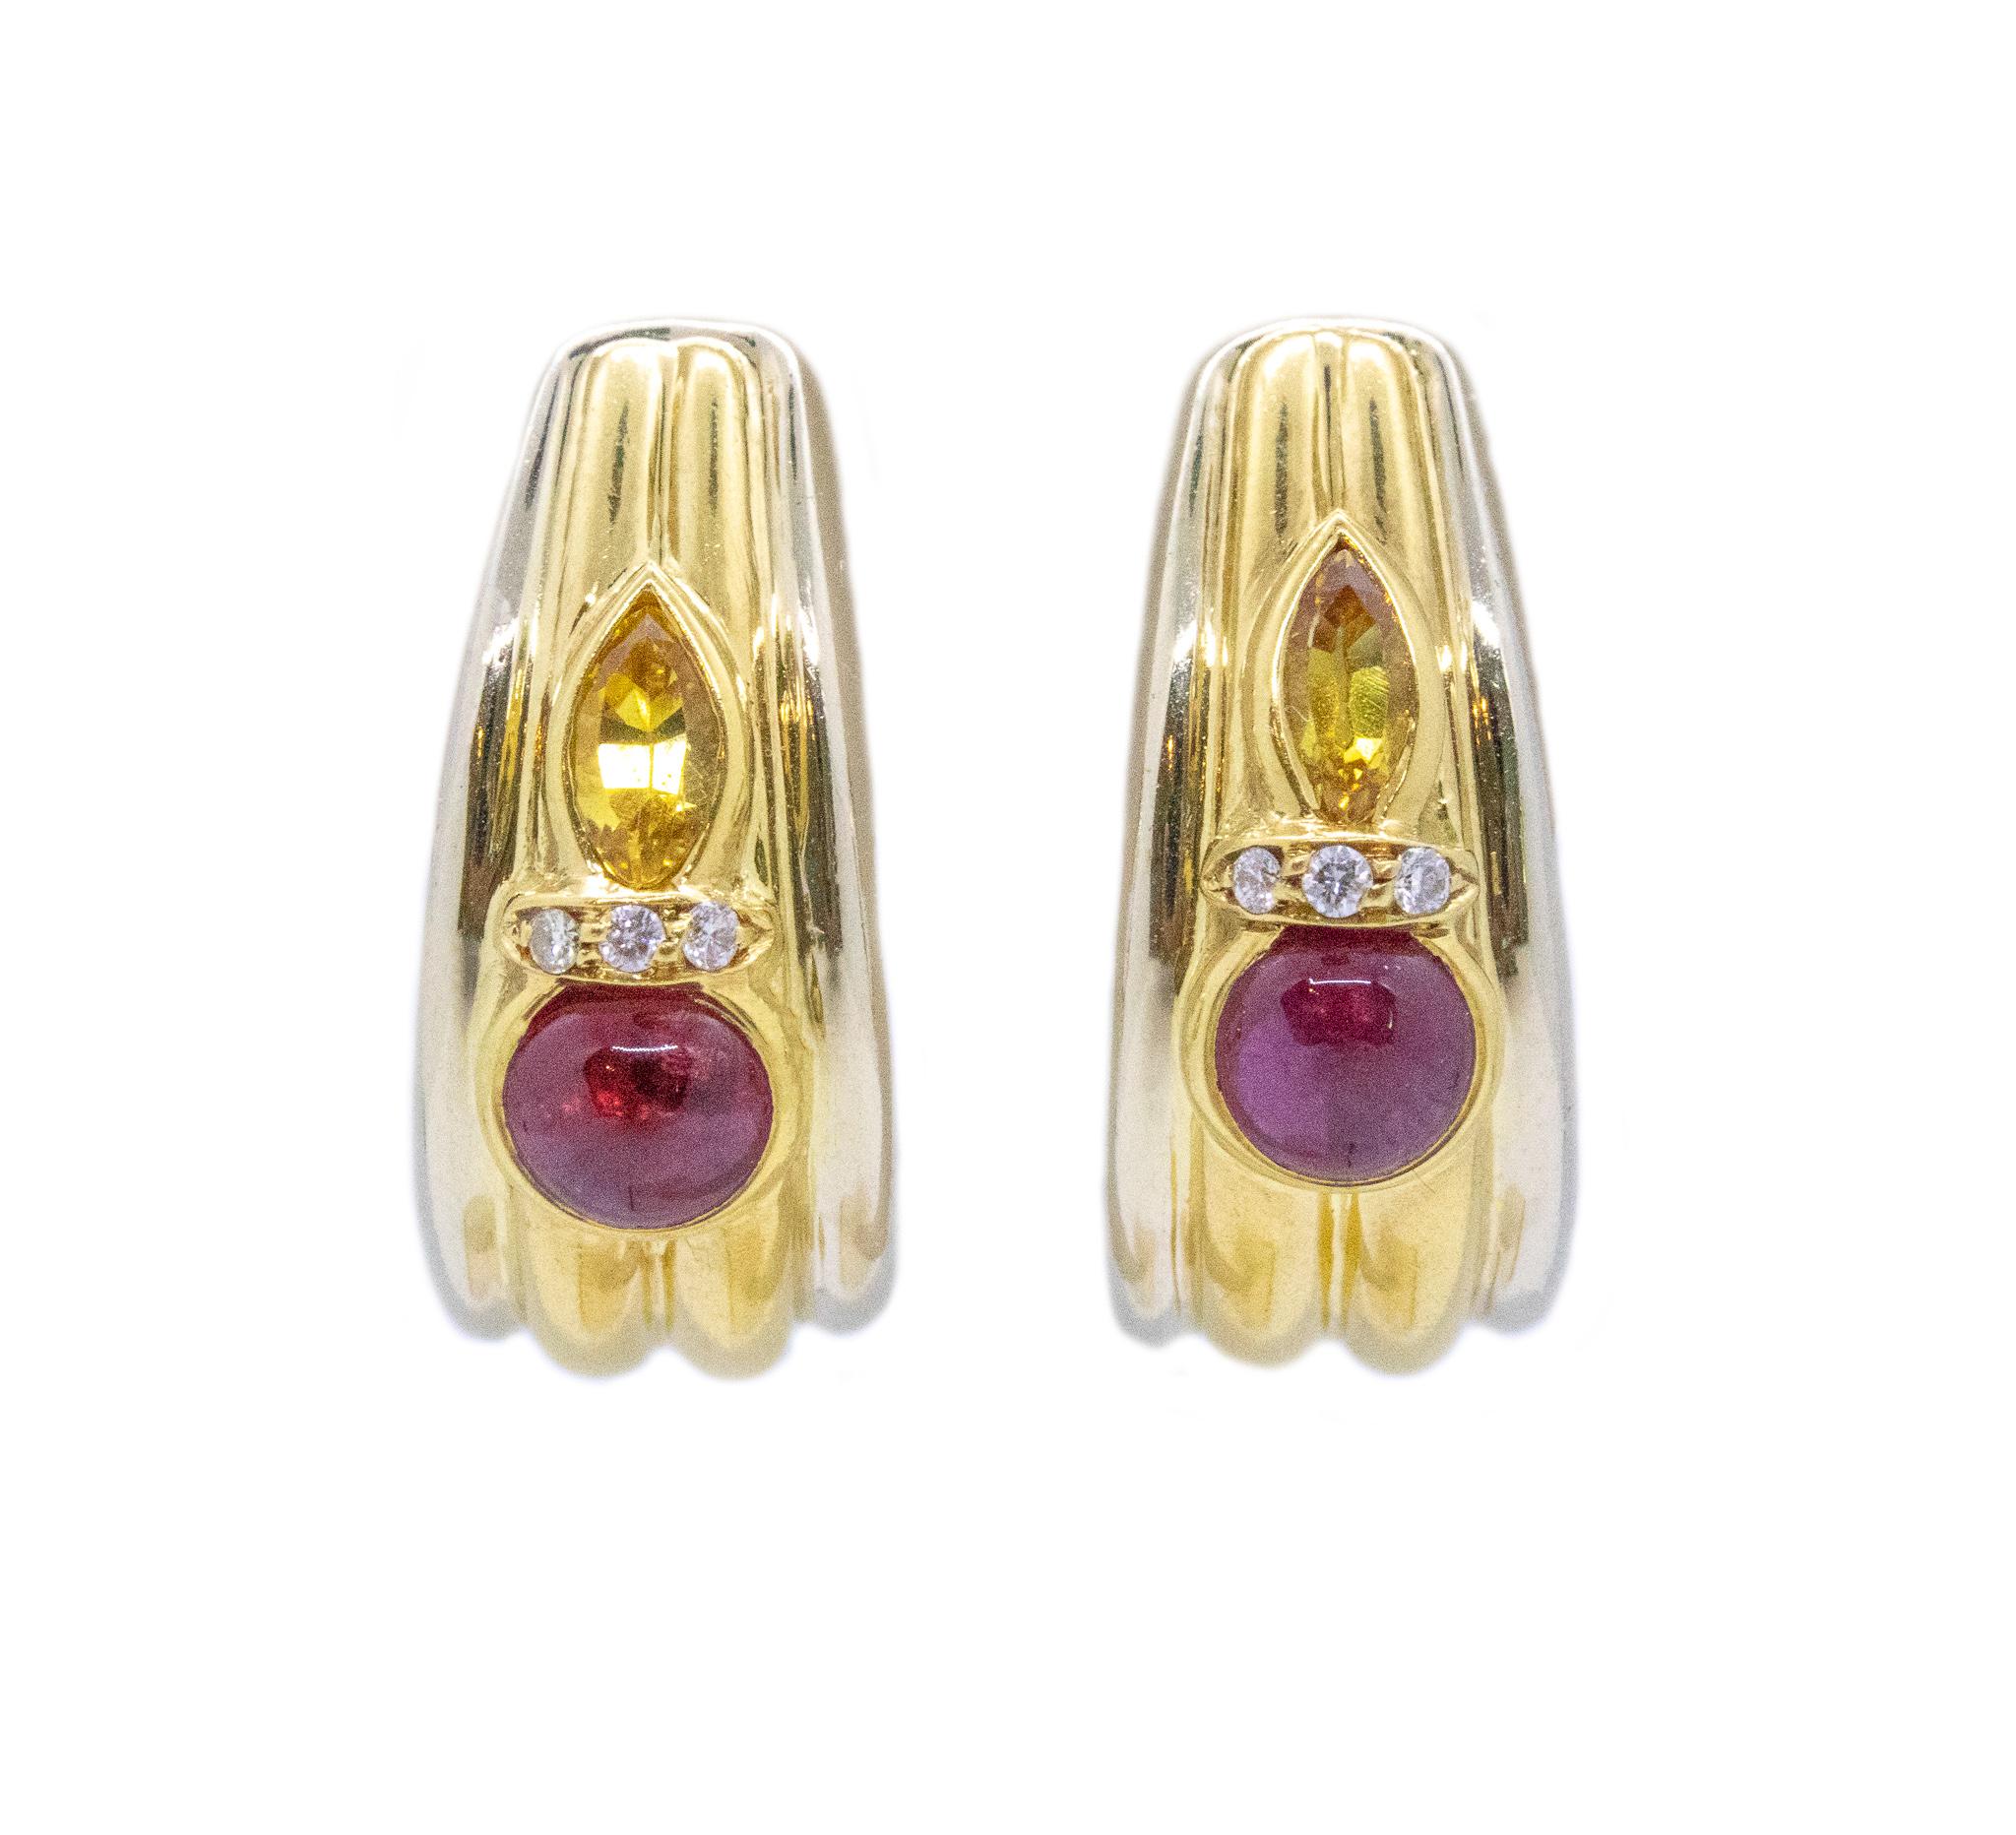 Modernist Chaumet Paris Clips Earrings in 18Kt Gold with 2.34 Cts Rubies Sapphires Diamond